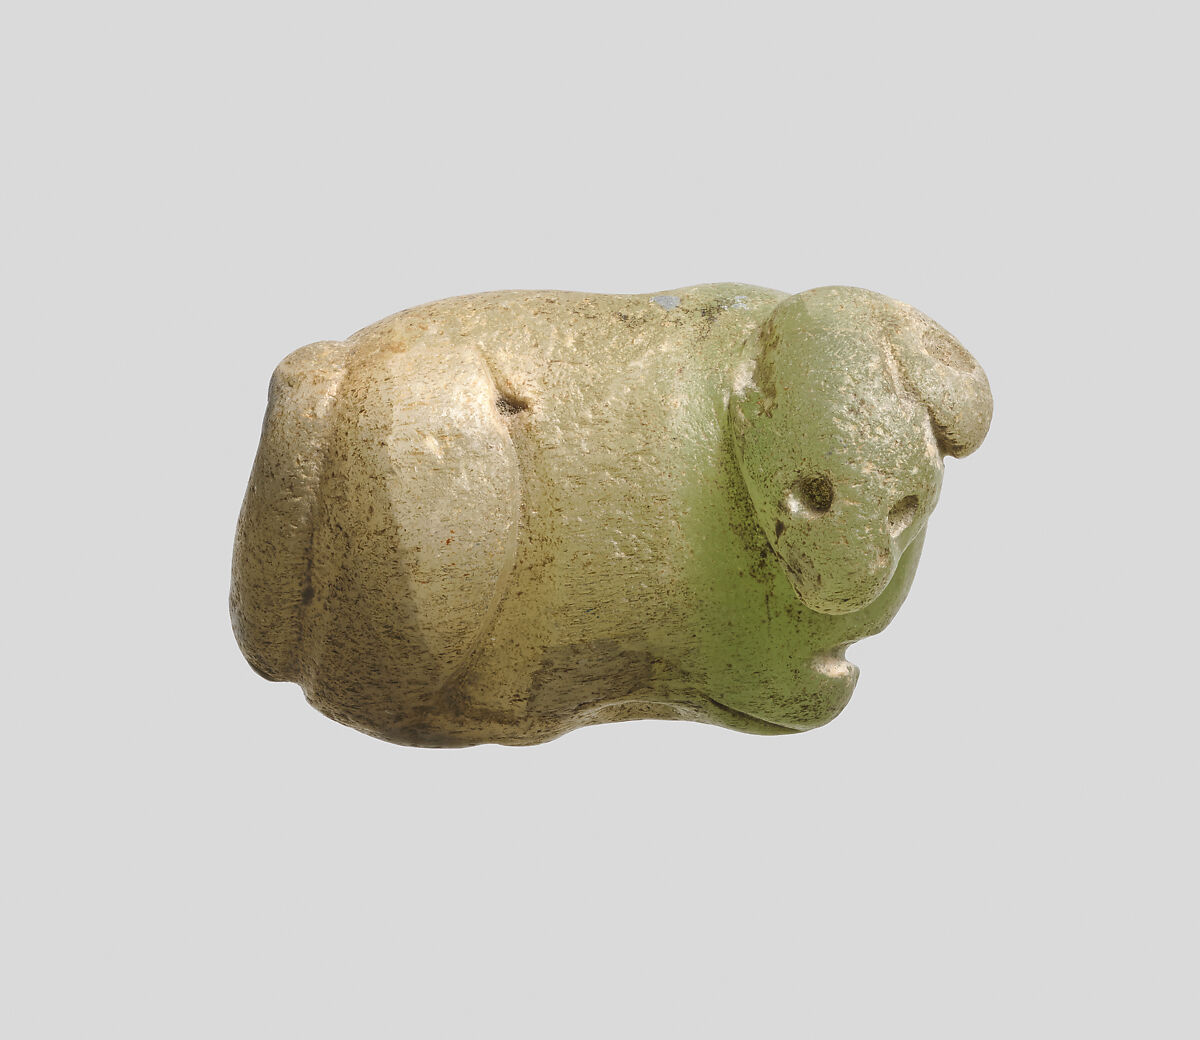 Seal amulet in the form of a recumbent bovid, Onyx marble, green-gray 